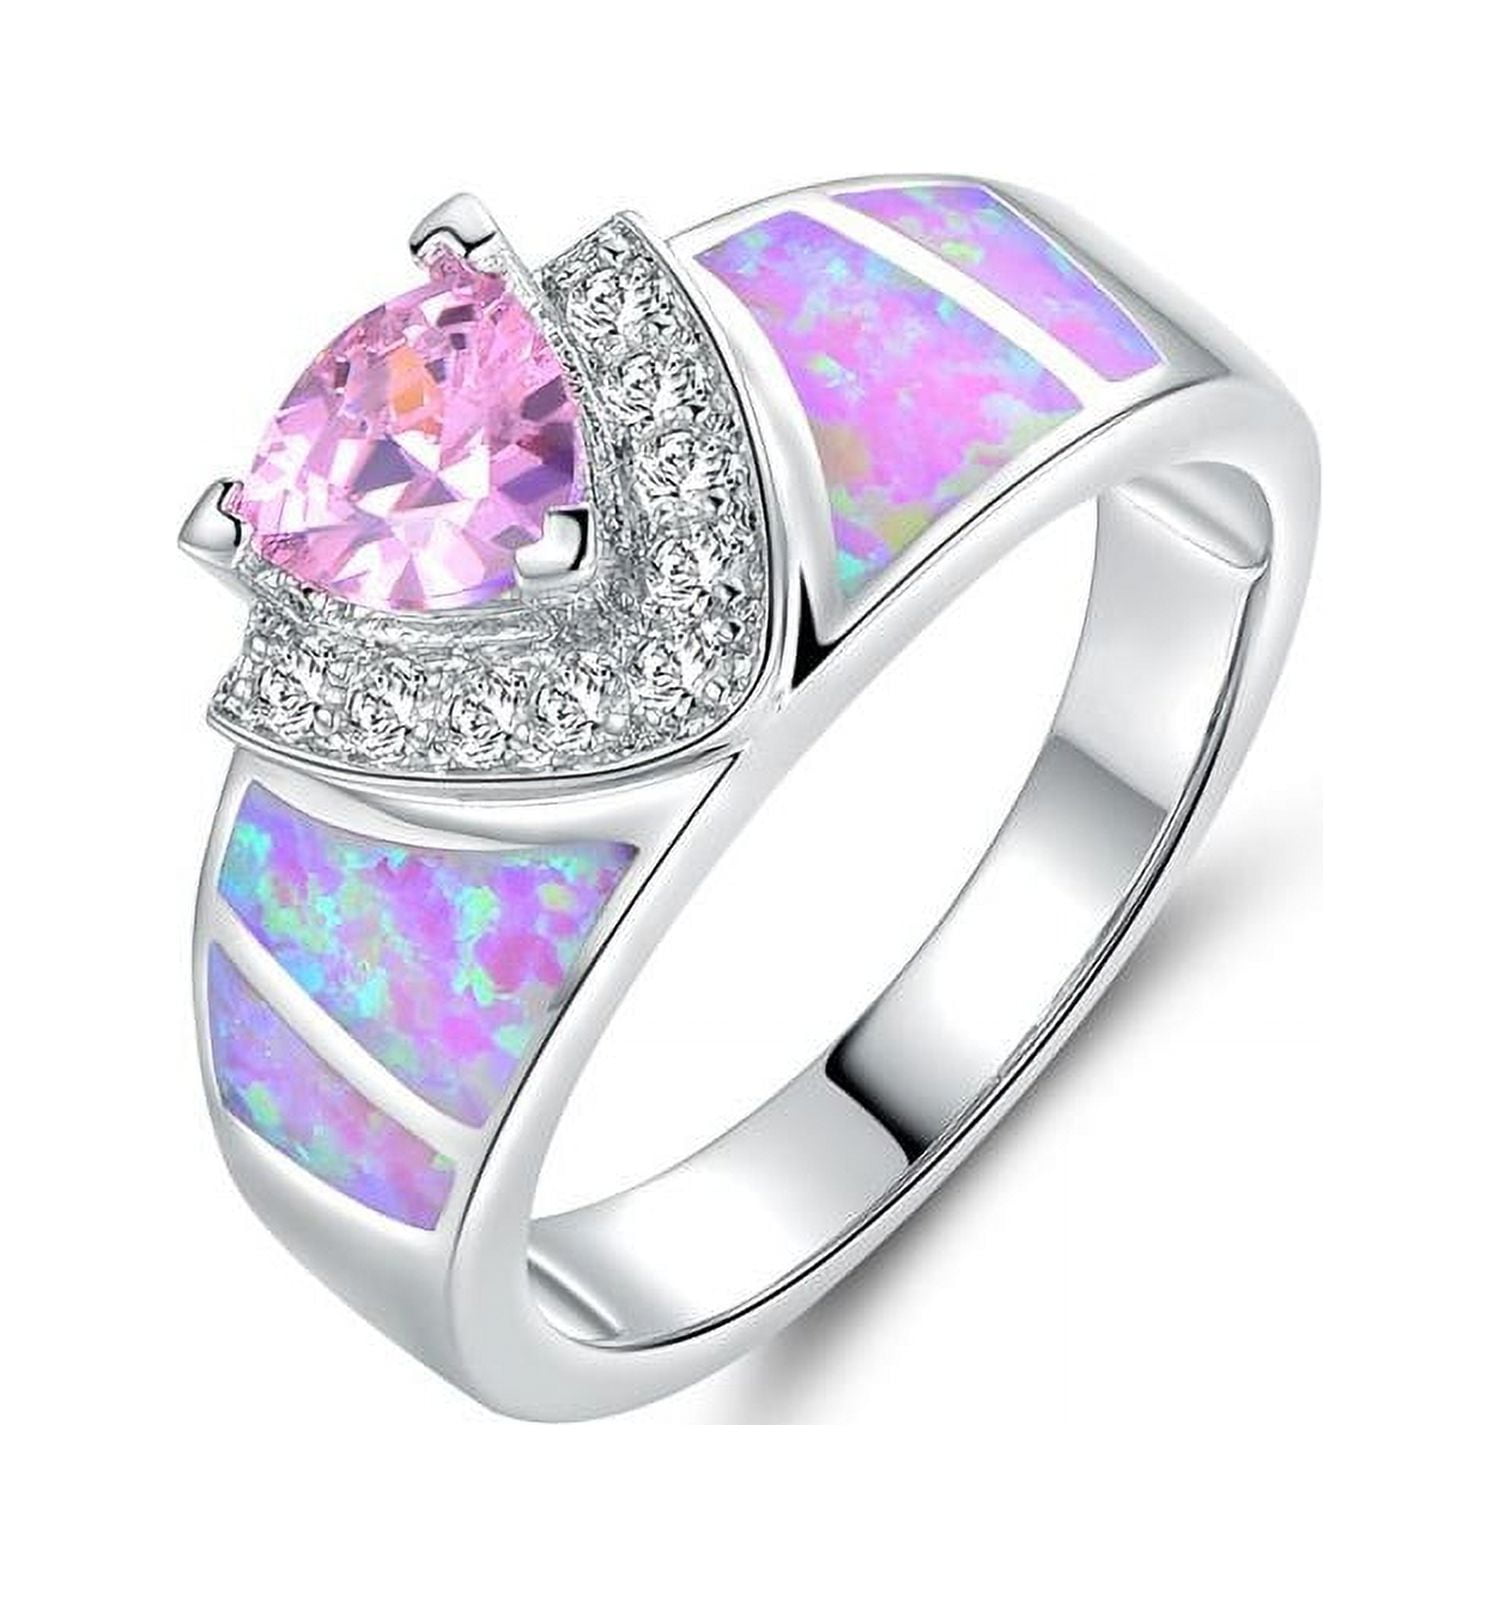 CiNily Opal Ring-14k Rose Gold Plated Pink Opal Cubic Zirconia CZ Ring Gemstone Ring for Women Size 5-12